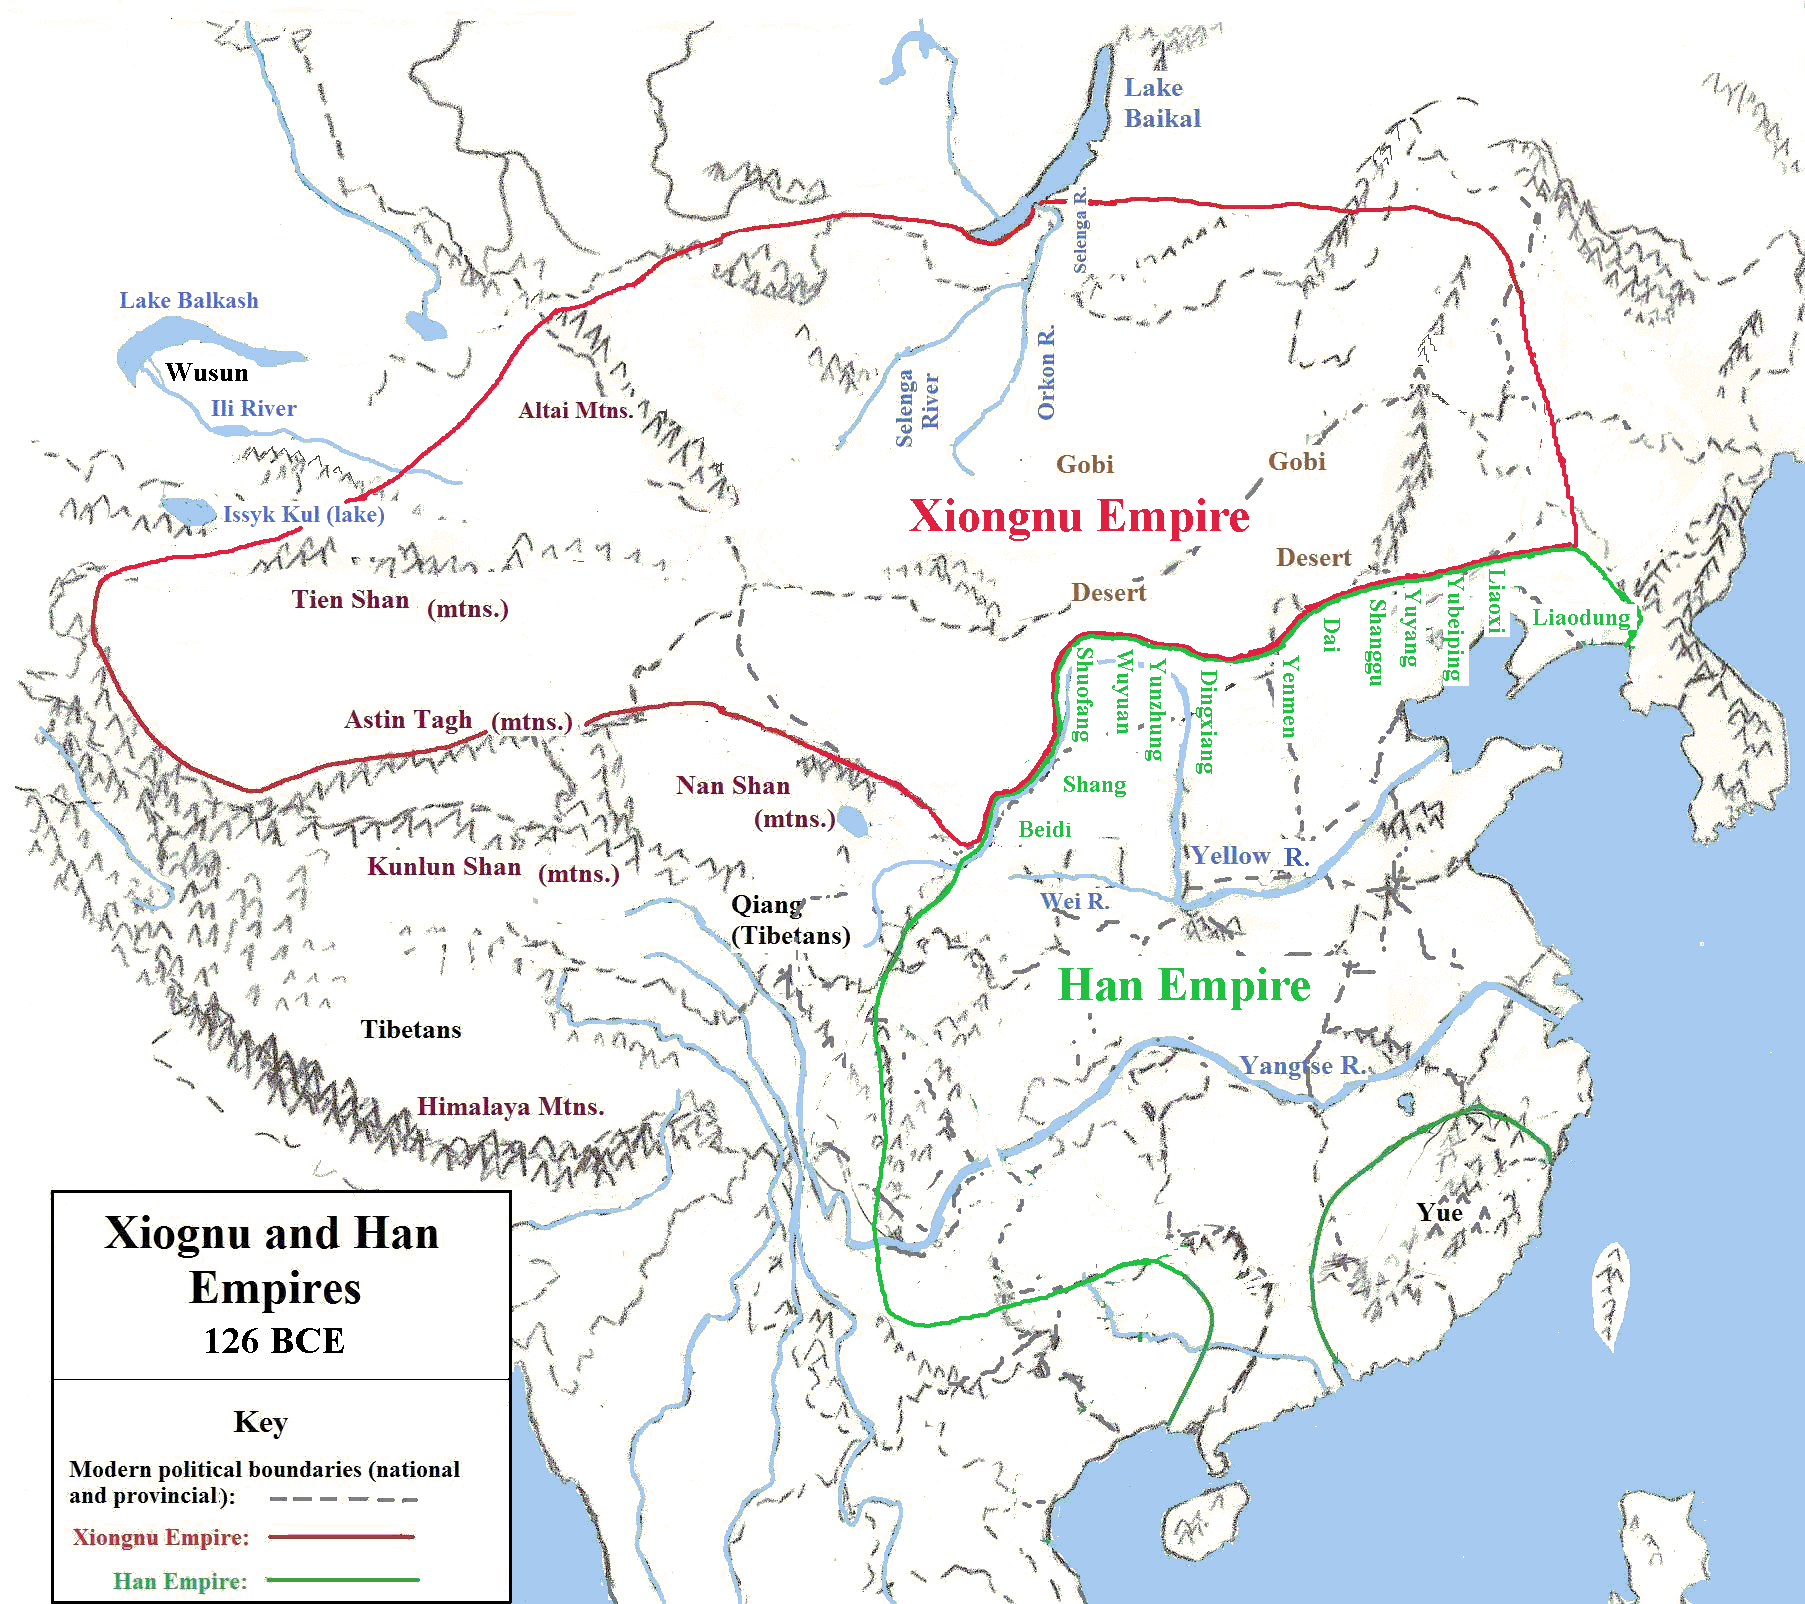 Map showing Xiongnu and<br /> Han Empires in 126 BCE.